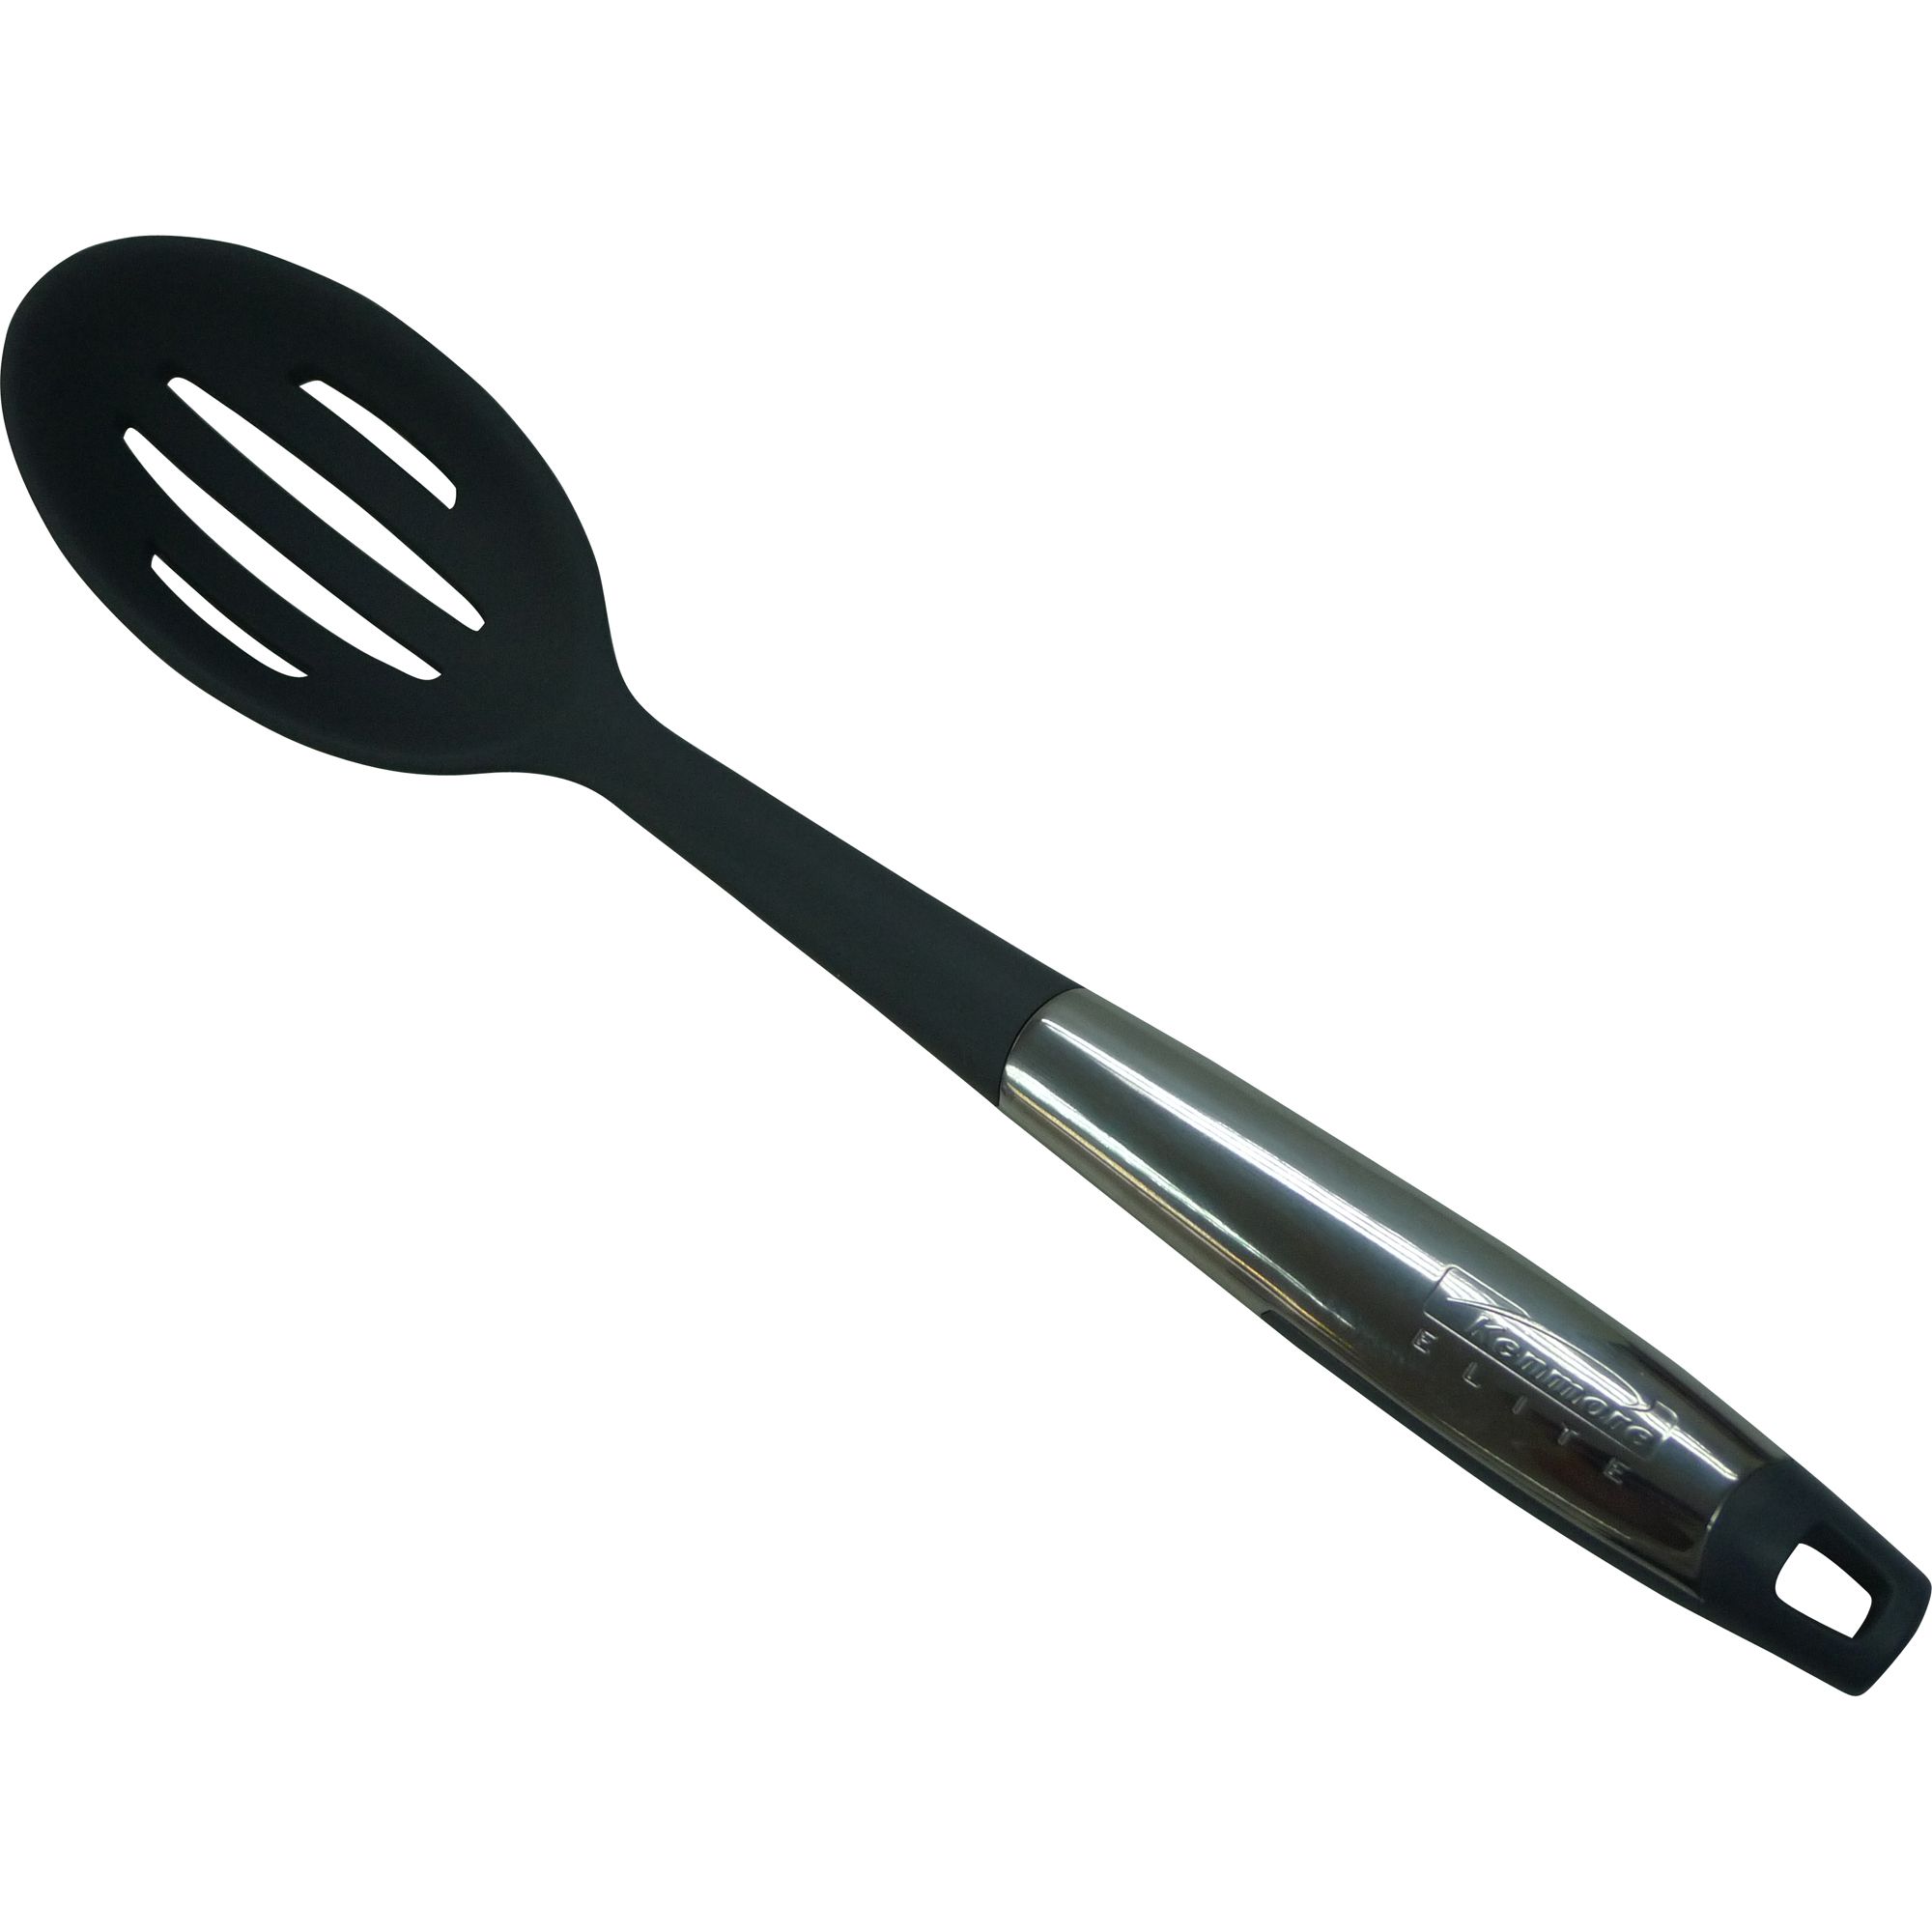 Kenmore Elite Silicone/Stainless Steel Slotted Spoon